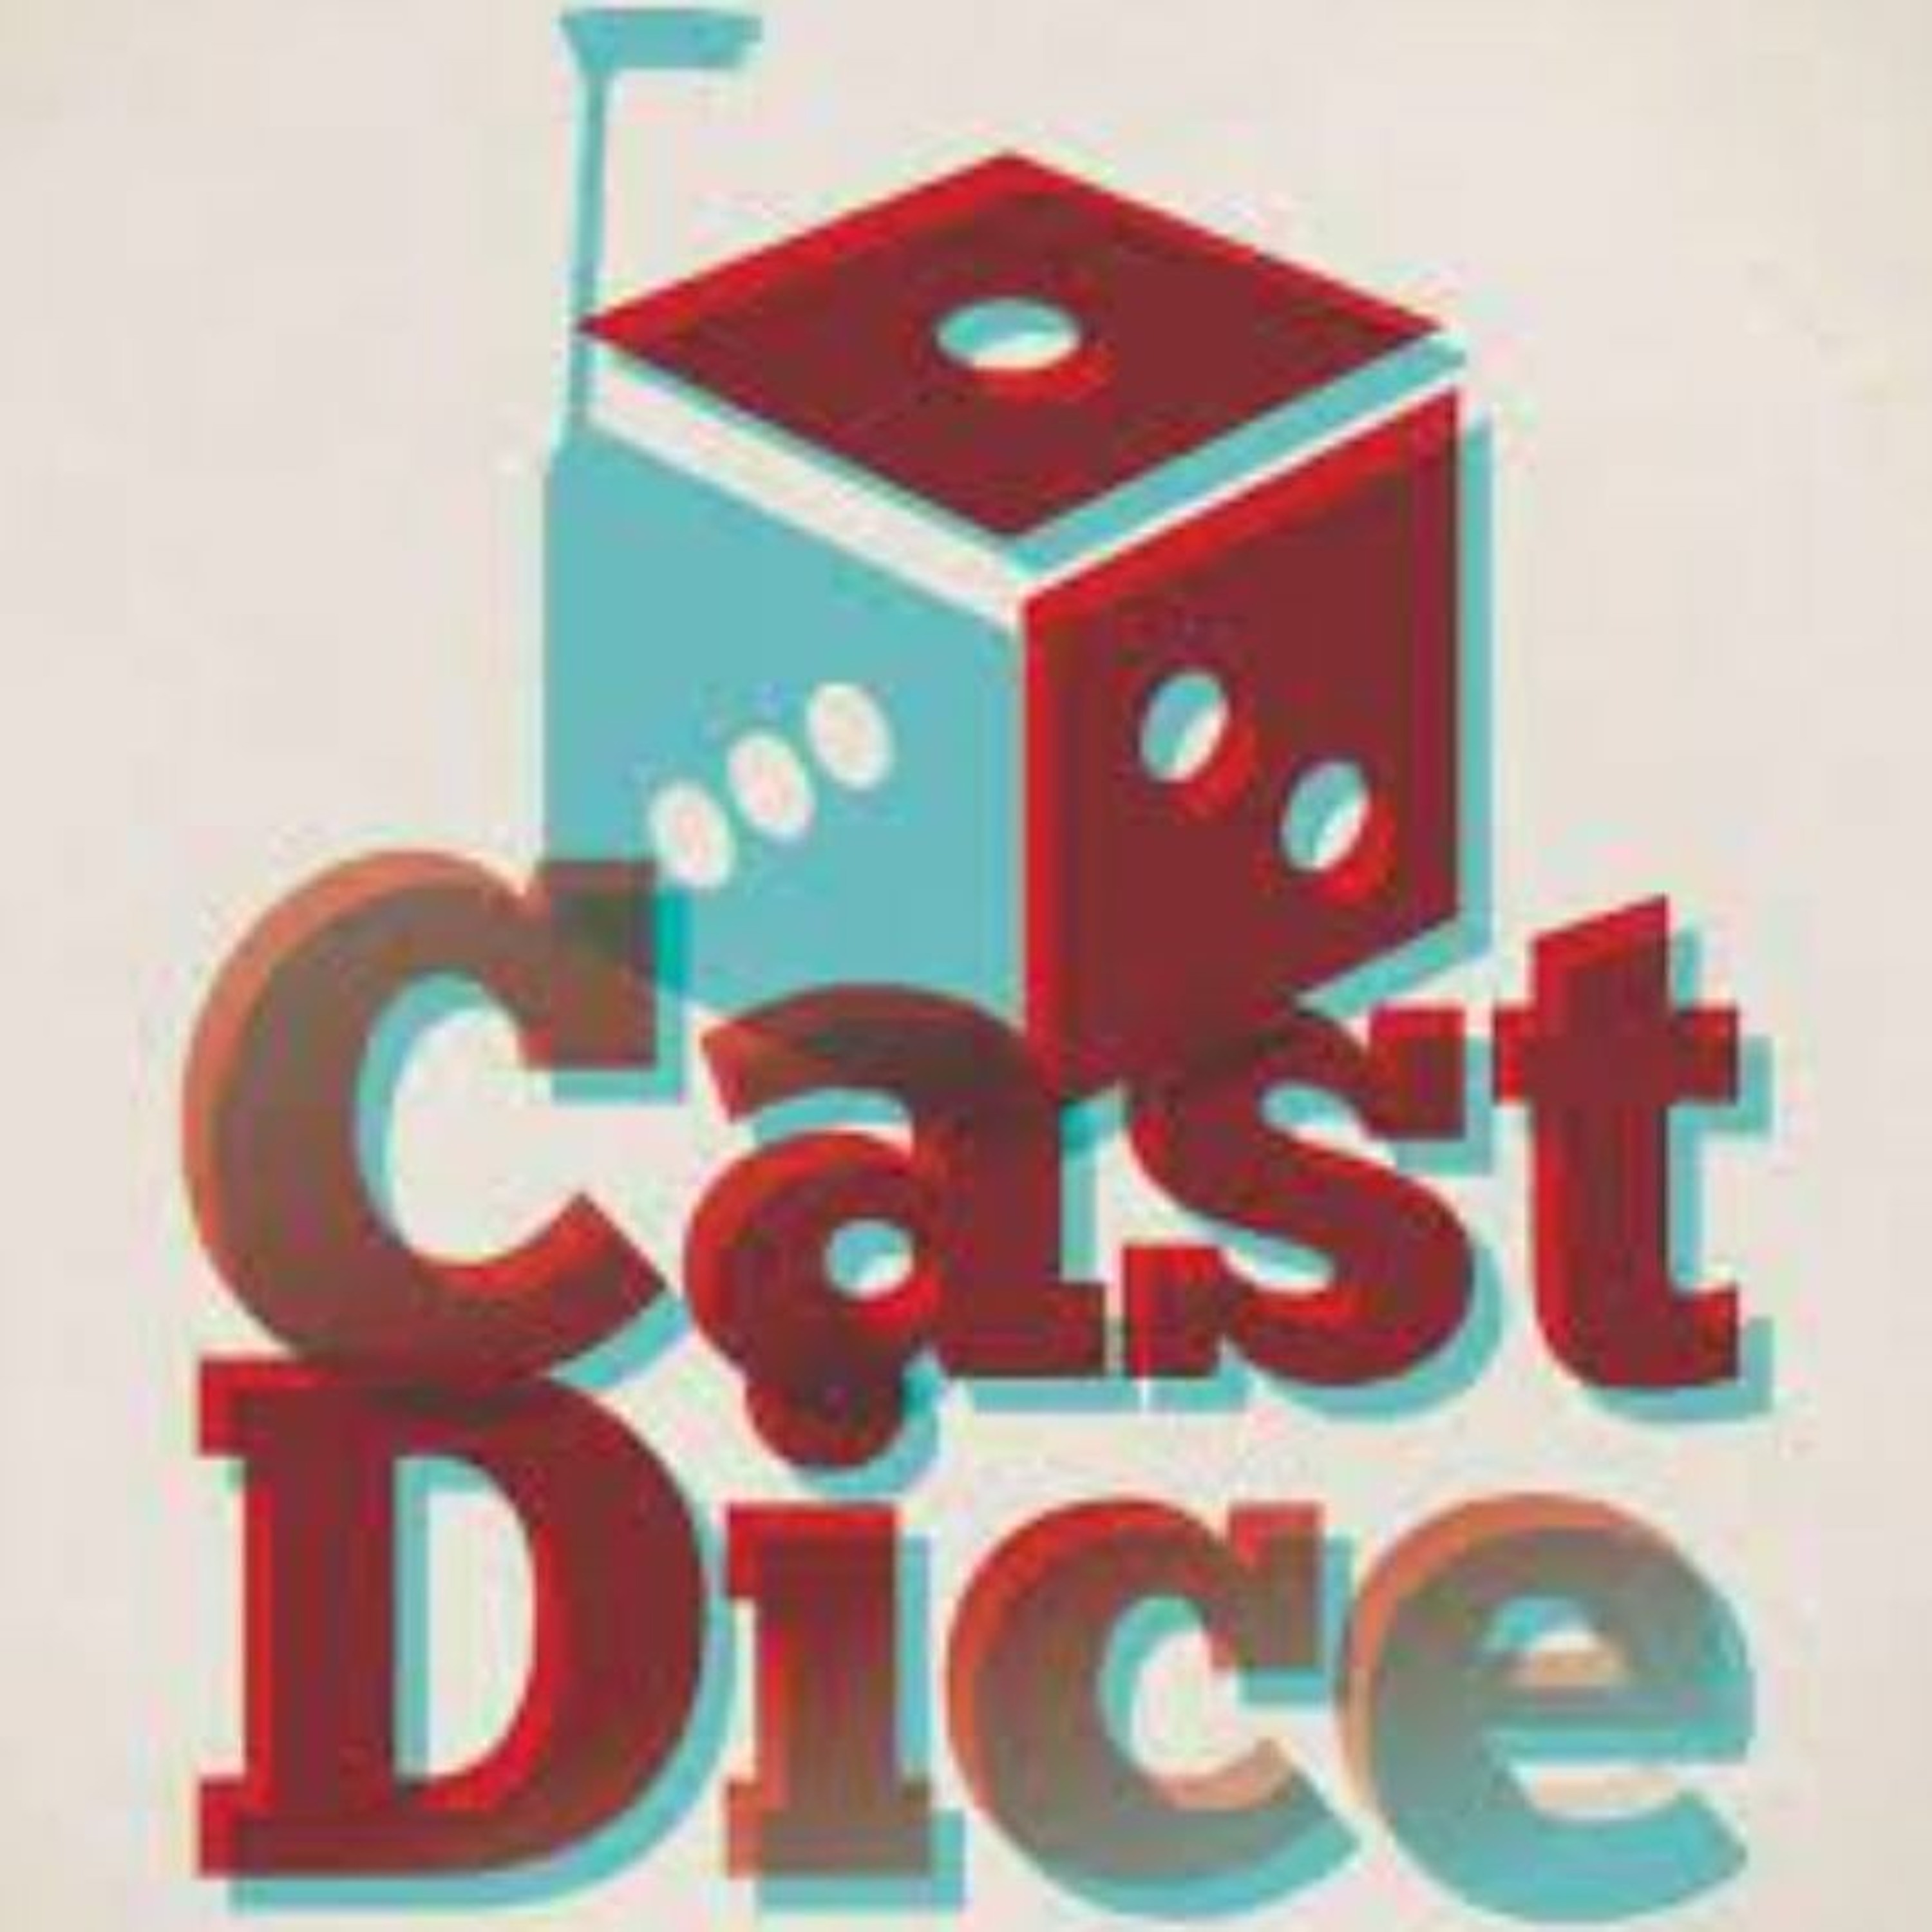 The Cast Dice Podcast - Ep 195 - Project Warhorse With Victoria Miniatures